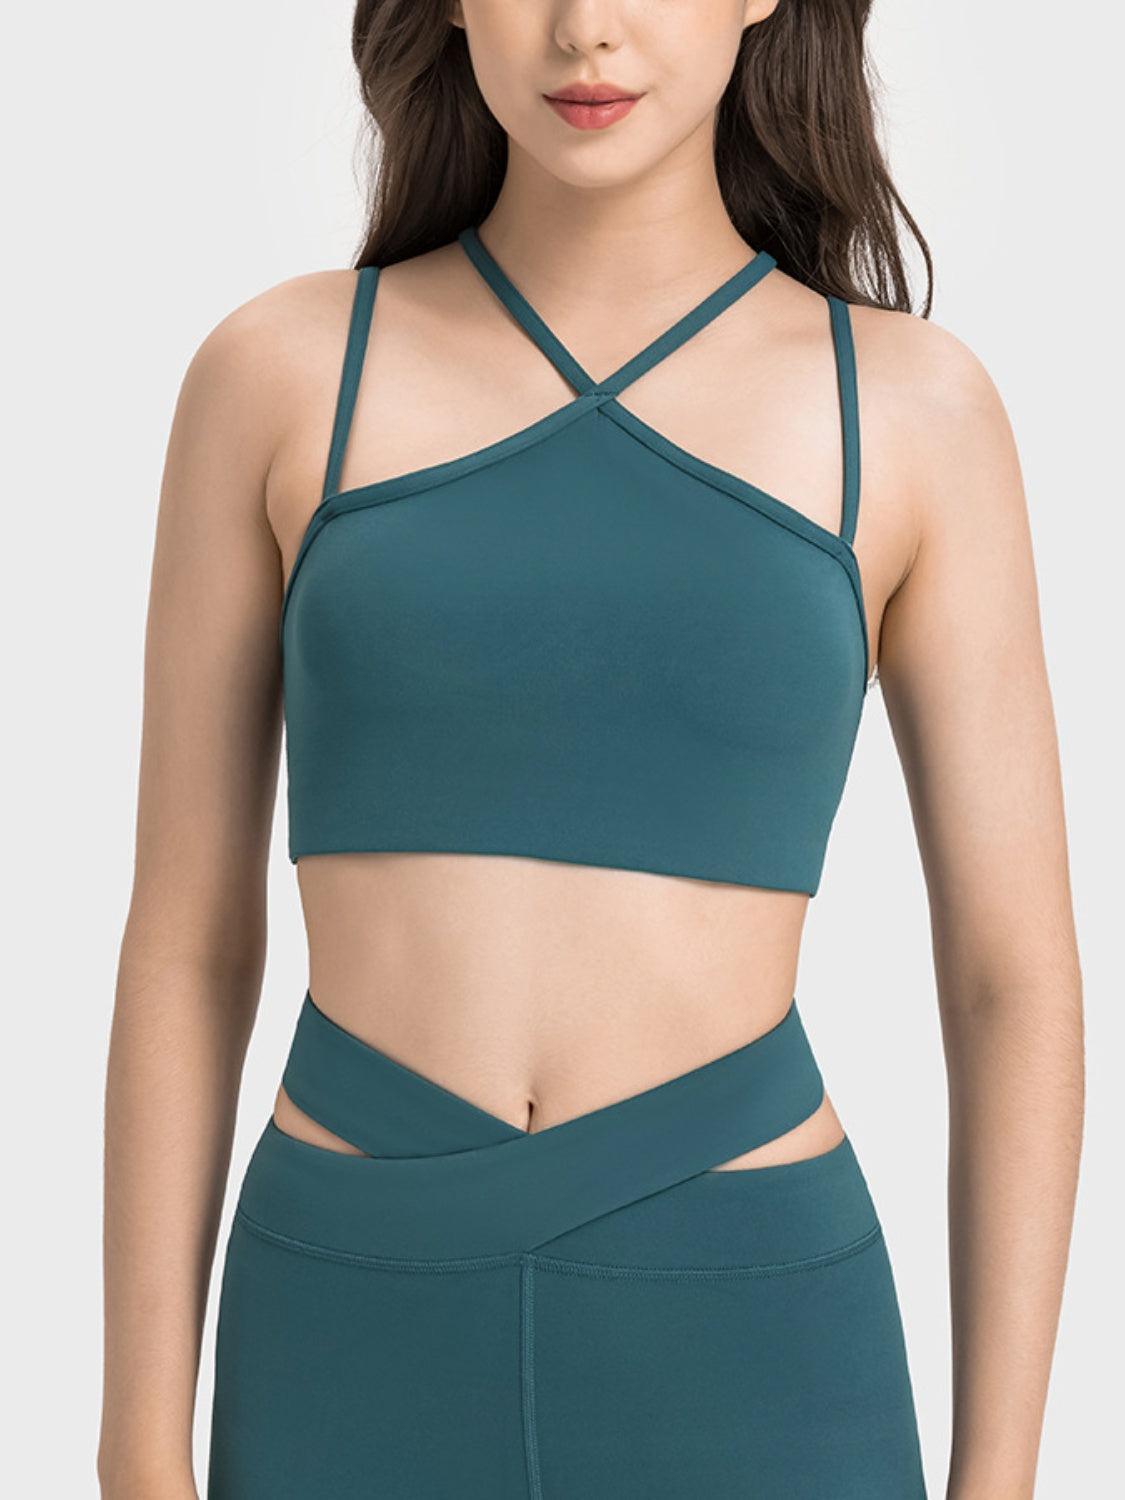 Extra Soft Double-Strap Cropped Cami Sports Bra